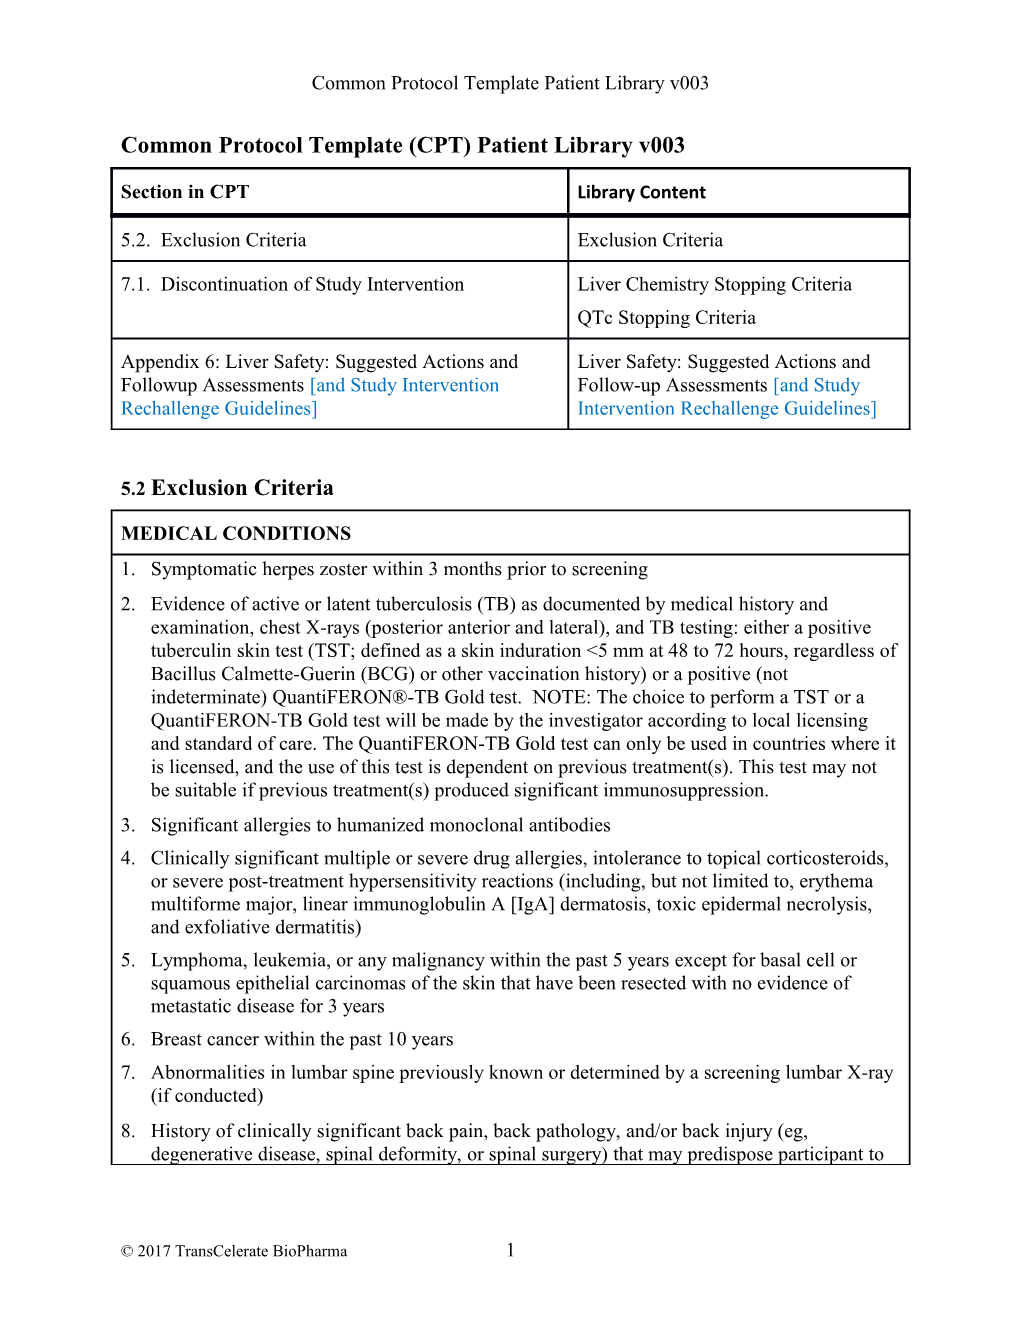 Common Protocol Template (CPT) Patient Library V003